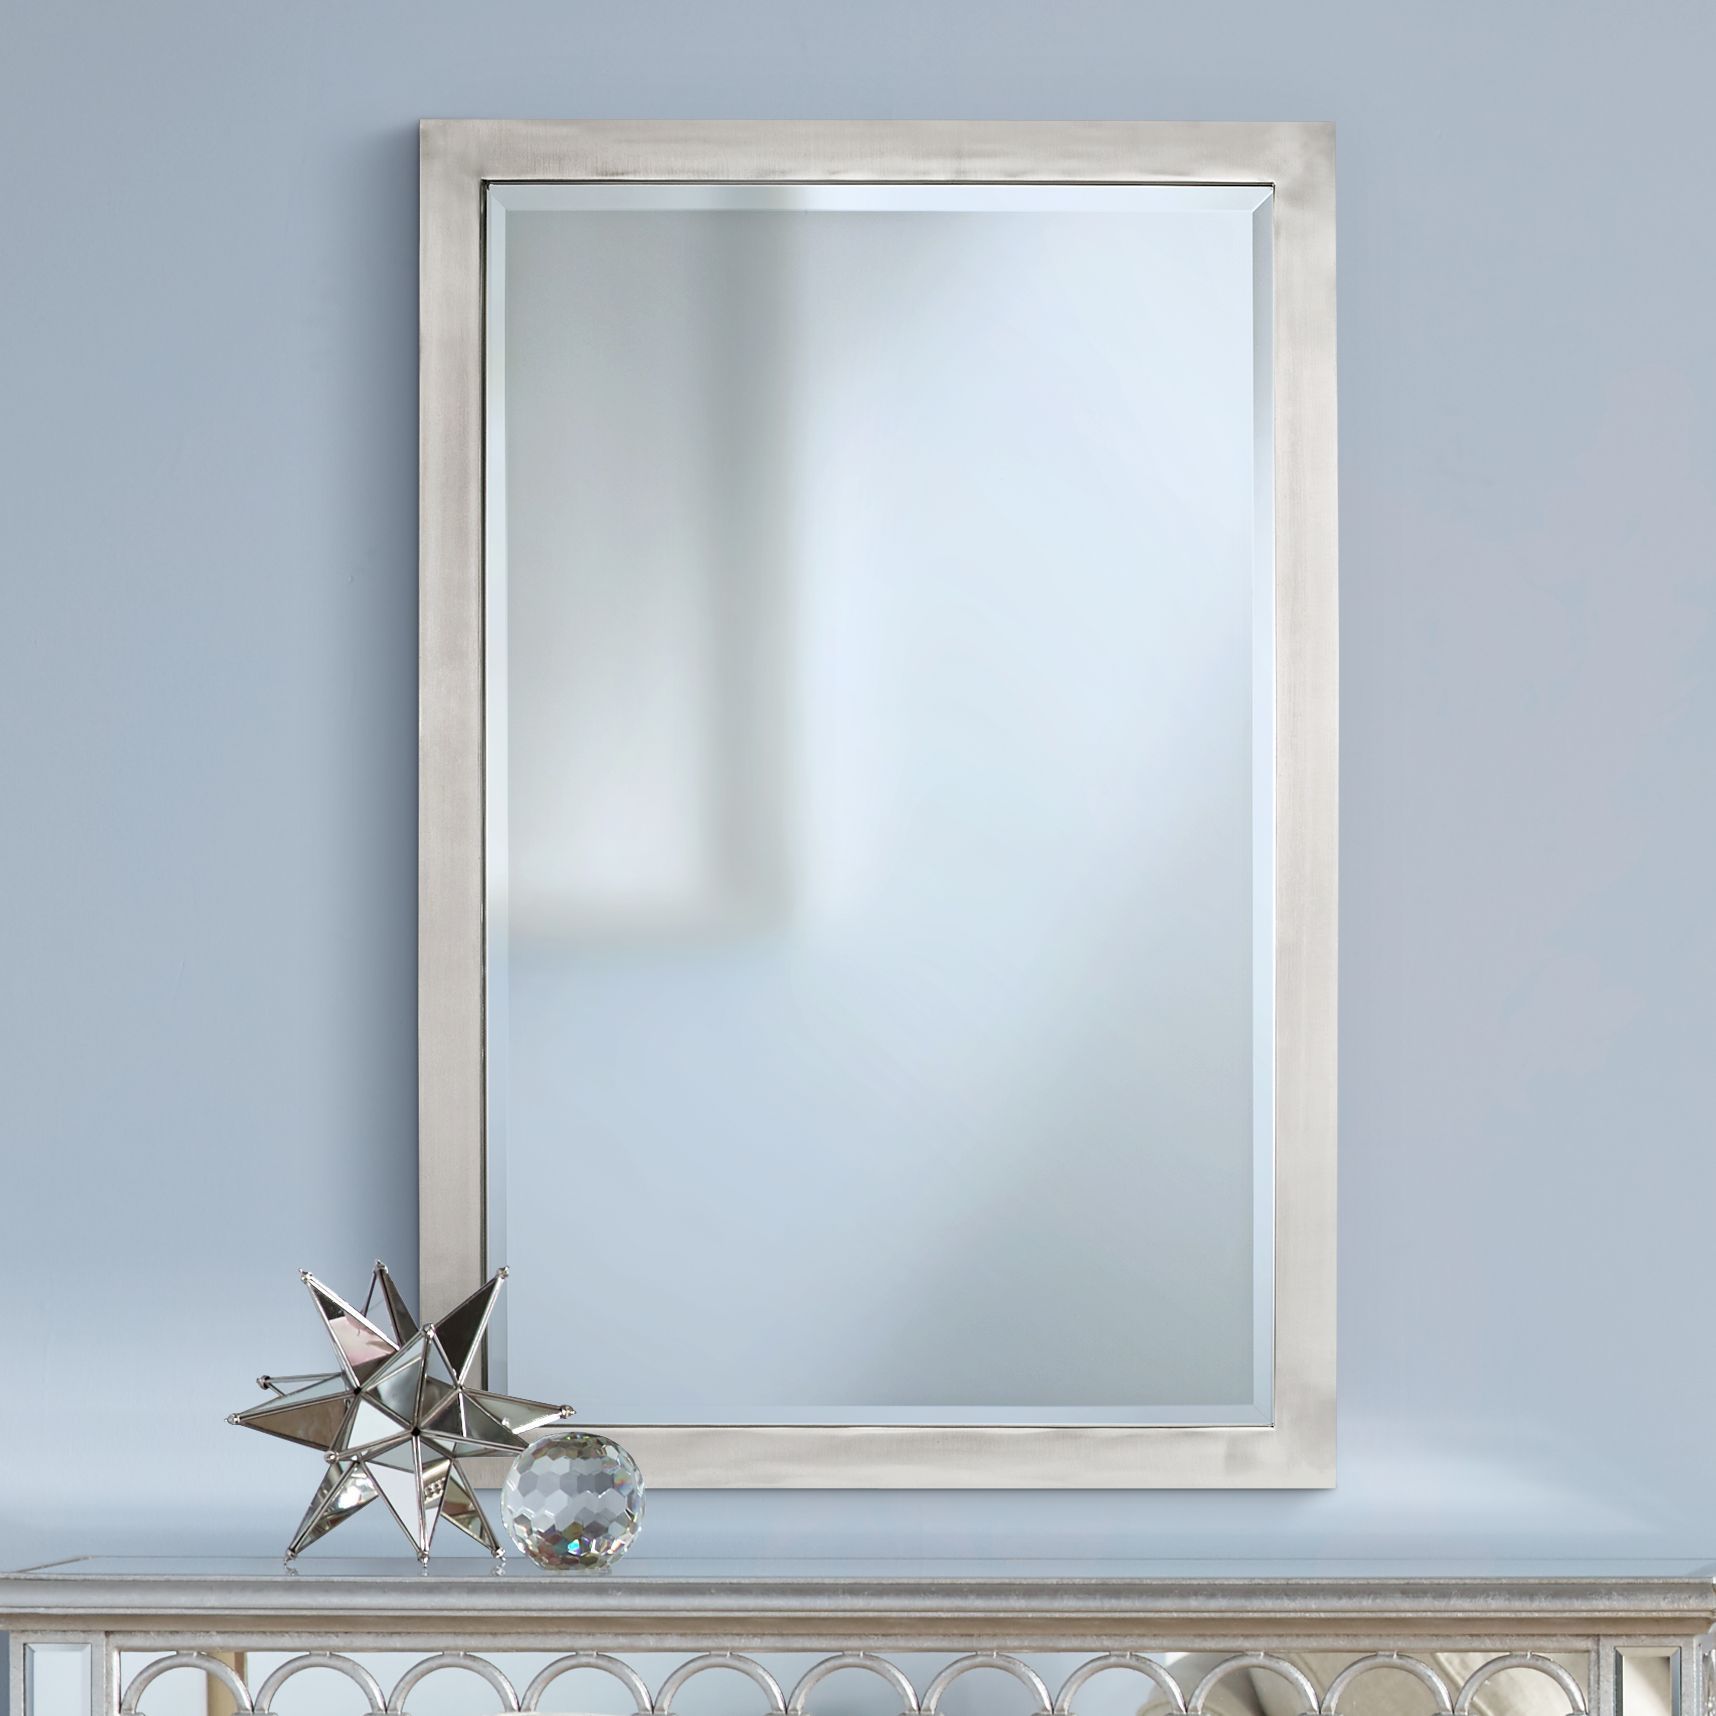 Metzeo 33" X 22" Brushed Nickel Wall Mirror – #t4543 | Lamps Plus In Throughout Nickel Floating Wall Mirrors (View 8 of 15)